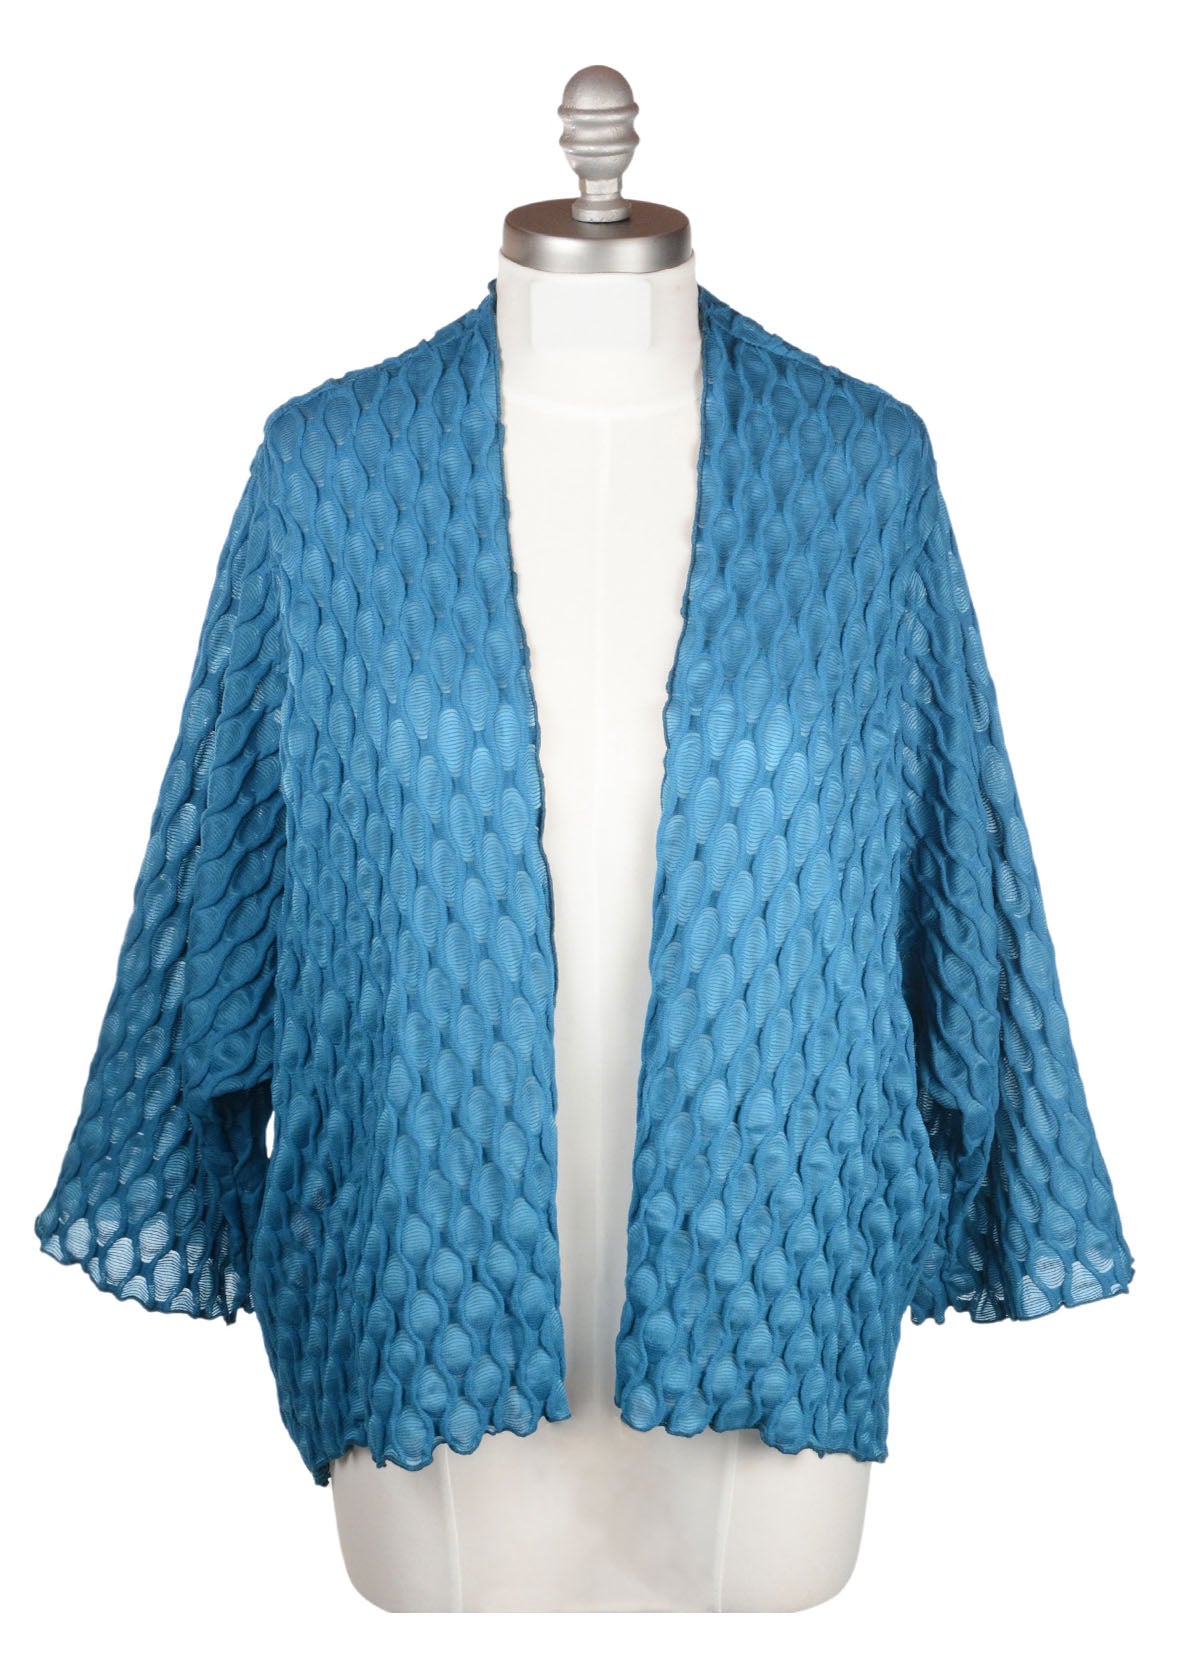 Product photo of the Fractal Collection Cerulean Blue Cardigan. LYC by Pandemonium is handmade in Seattle, WA, USA.